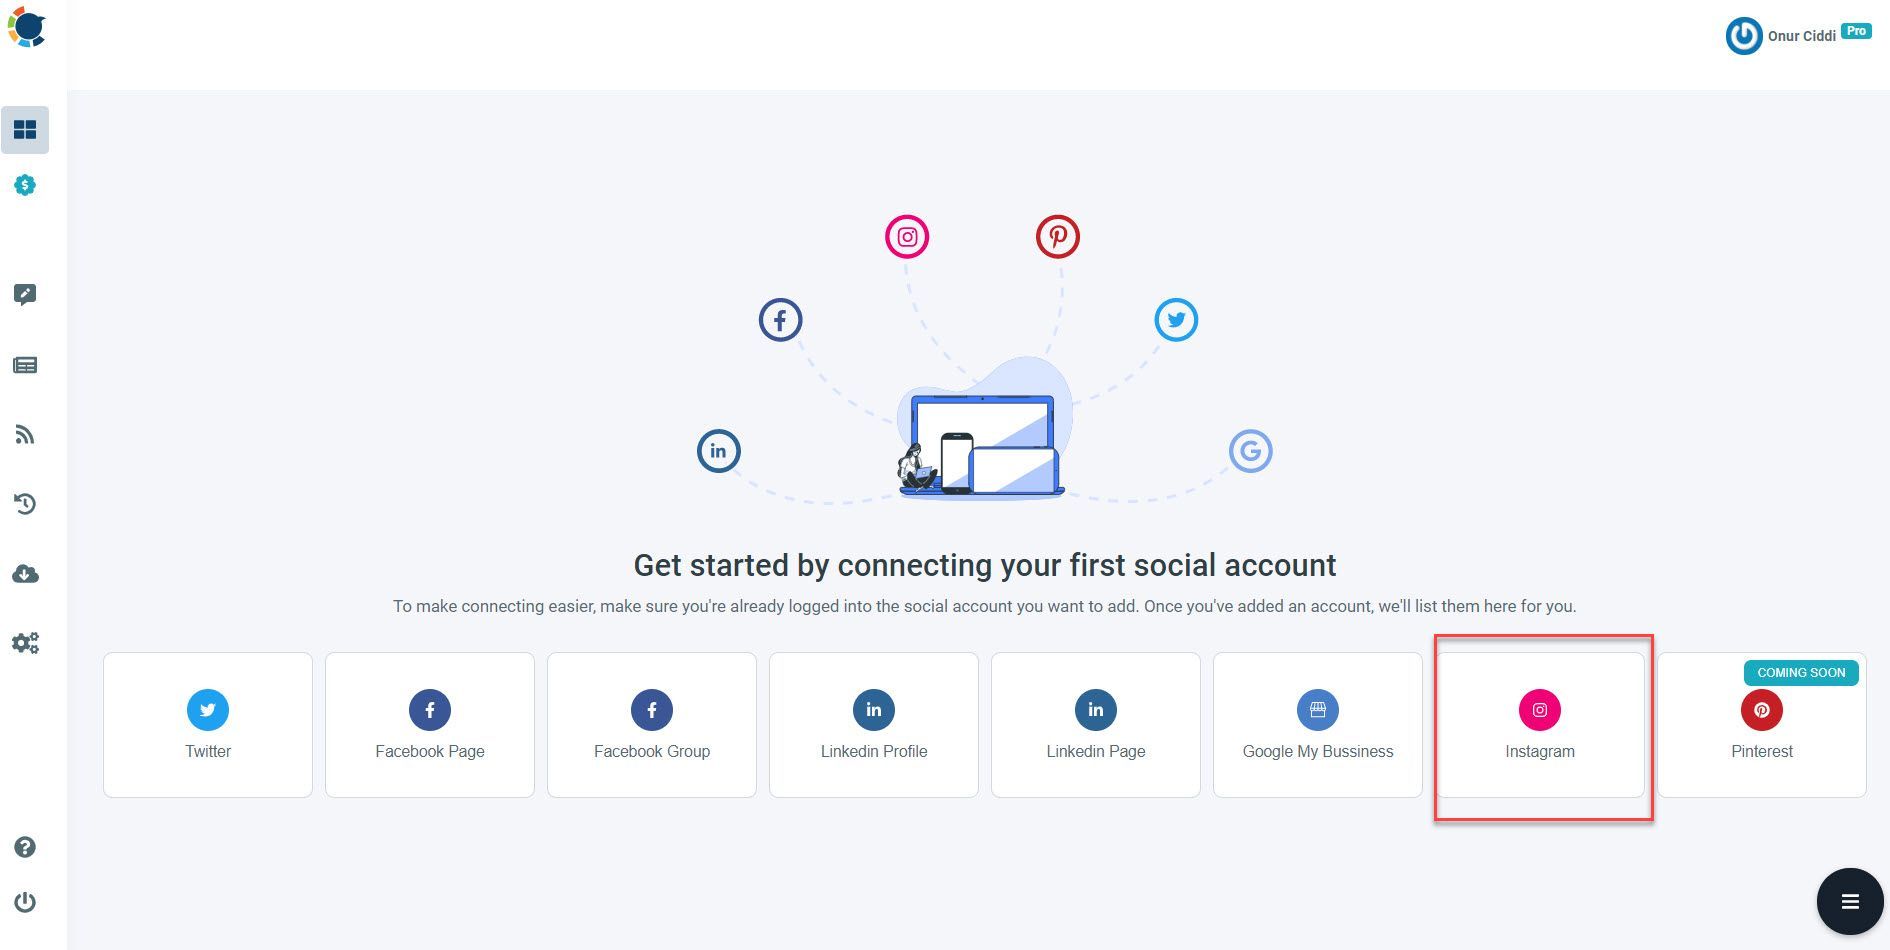 With Circleboom Publish, you can manage multiple social media accounts from a single dashboard.